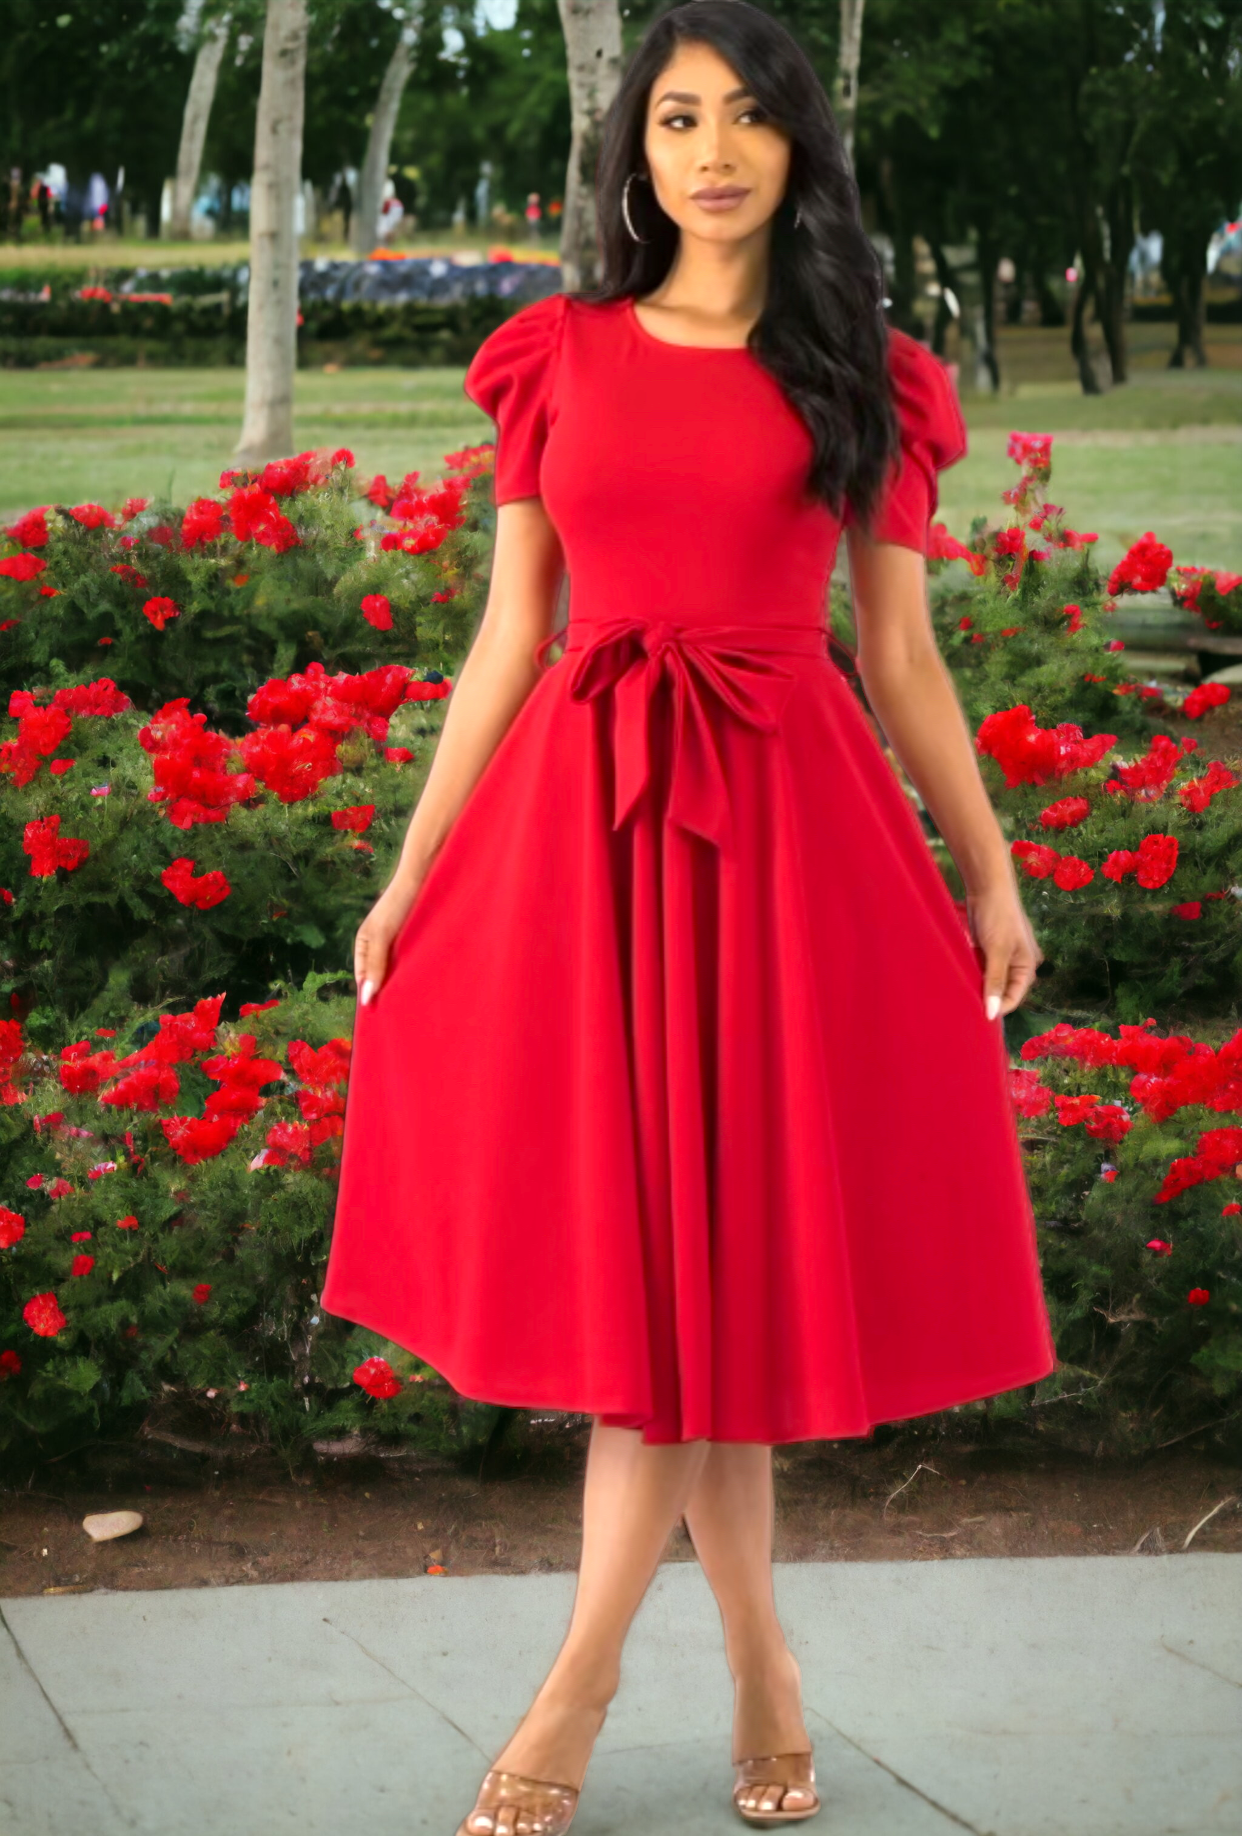 Puff Sleeve Cocktail Dress, Sizes 1X - 3X (Red)